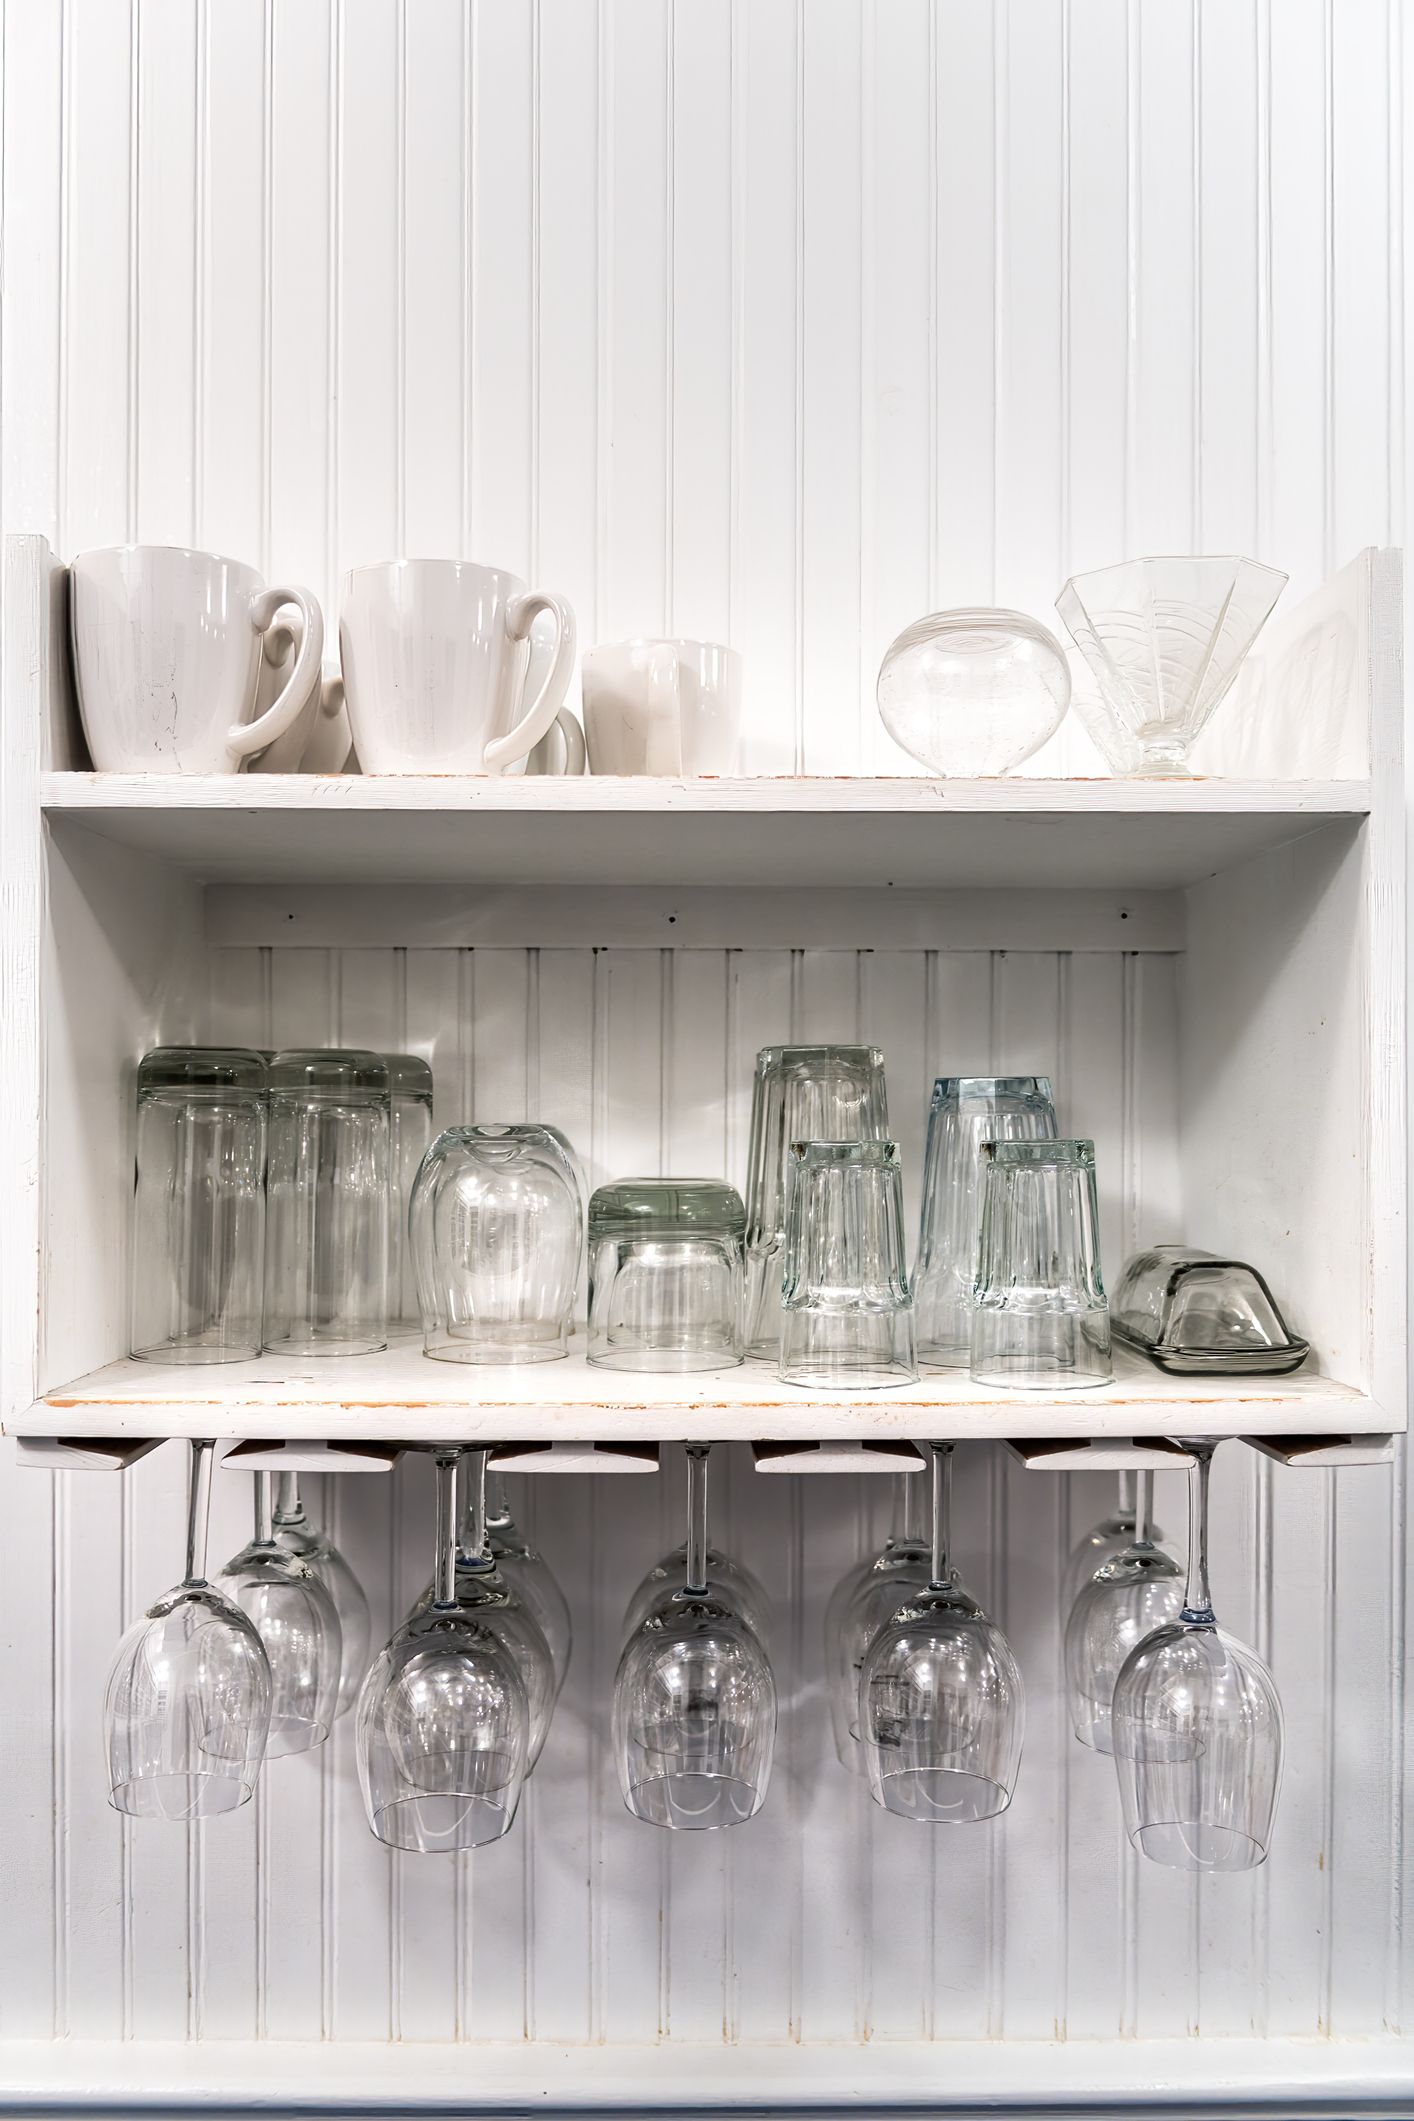 https://hips.hearstapps.com/hmg-prod/images/how-to-organize-kitchen-cabinets-under-cabinet-wine-glass-rack-6584a1a4ebbf9.jpg